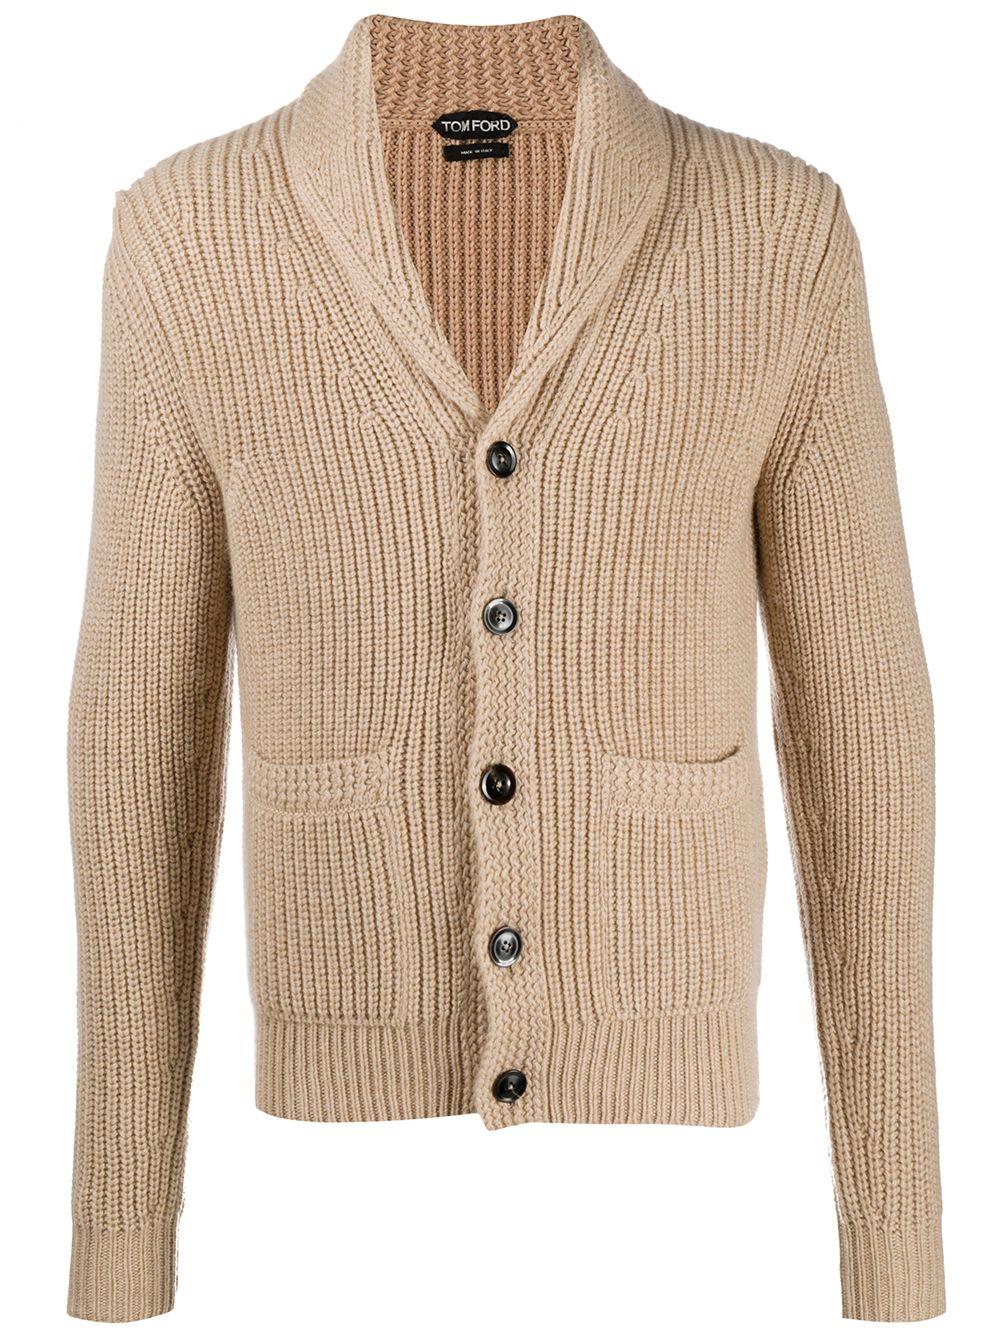 Tom Ford Shawl-collar Cardigan in Natural for Men - Lyst